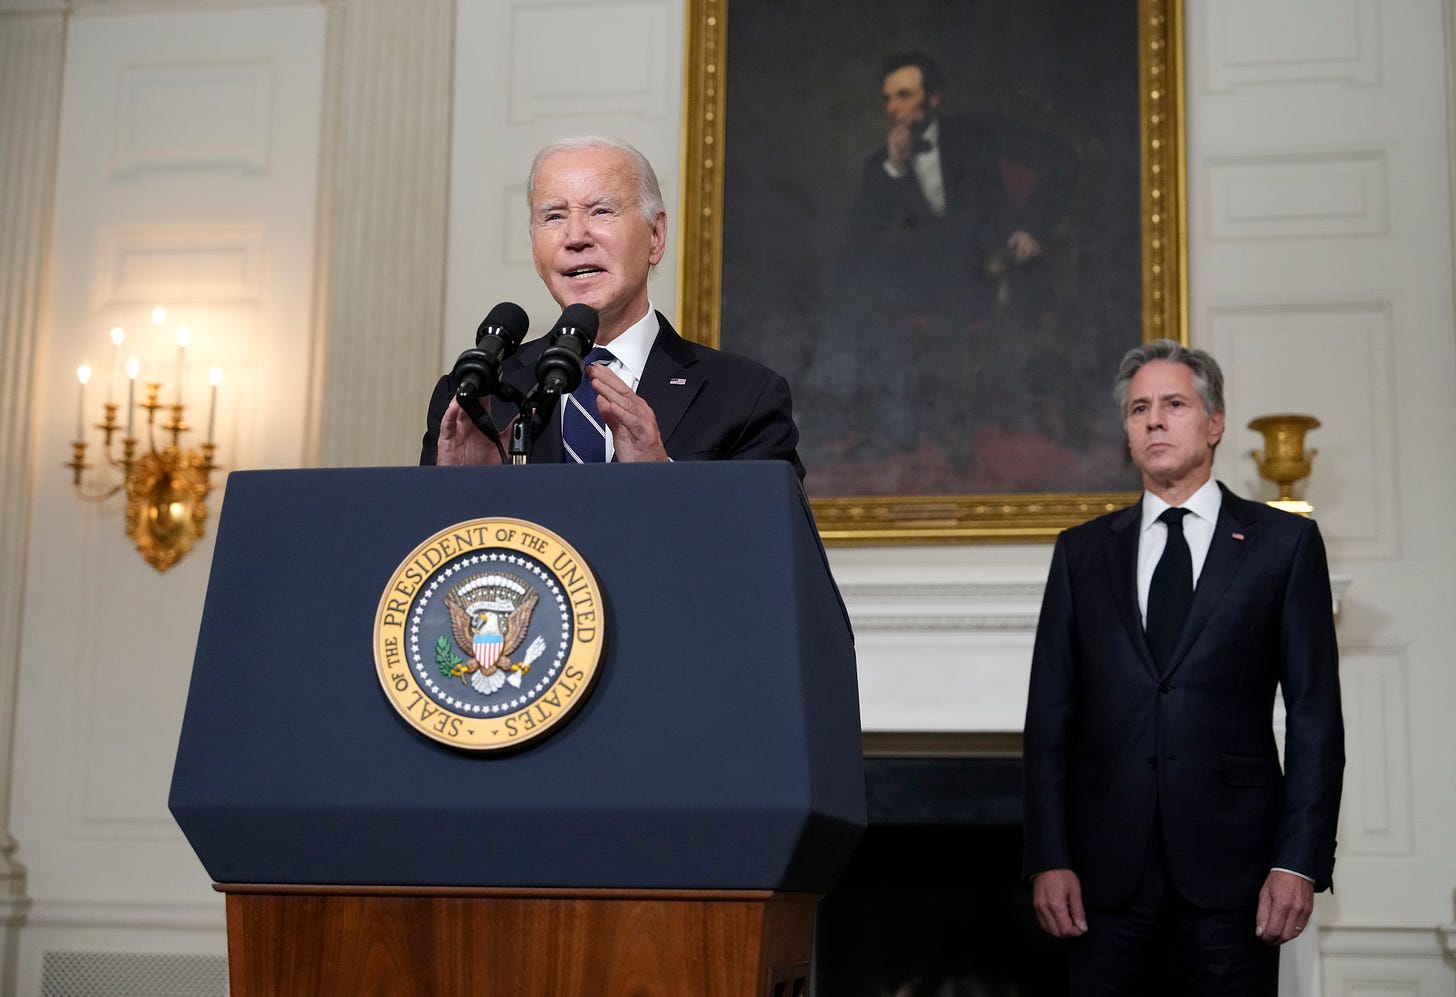 “An act of sheer evil.” President Biden, joined by Secretary of State Blinken, responded to Hamas’ attacks on Israel in a speech on Oct. 10. Image Credit: Drew Angerer/Getty Images